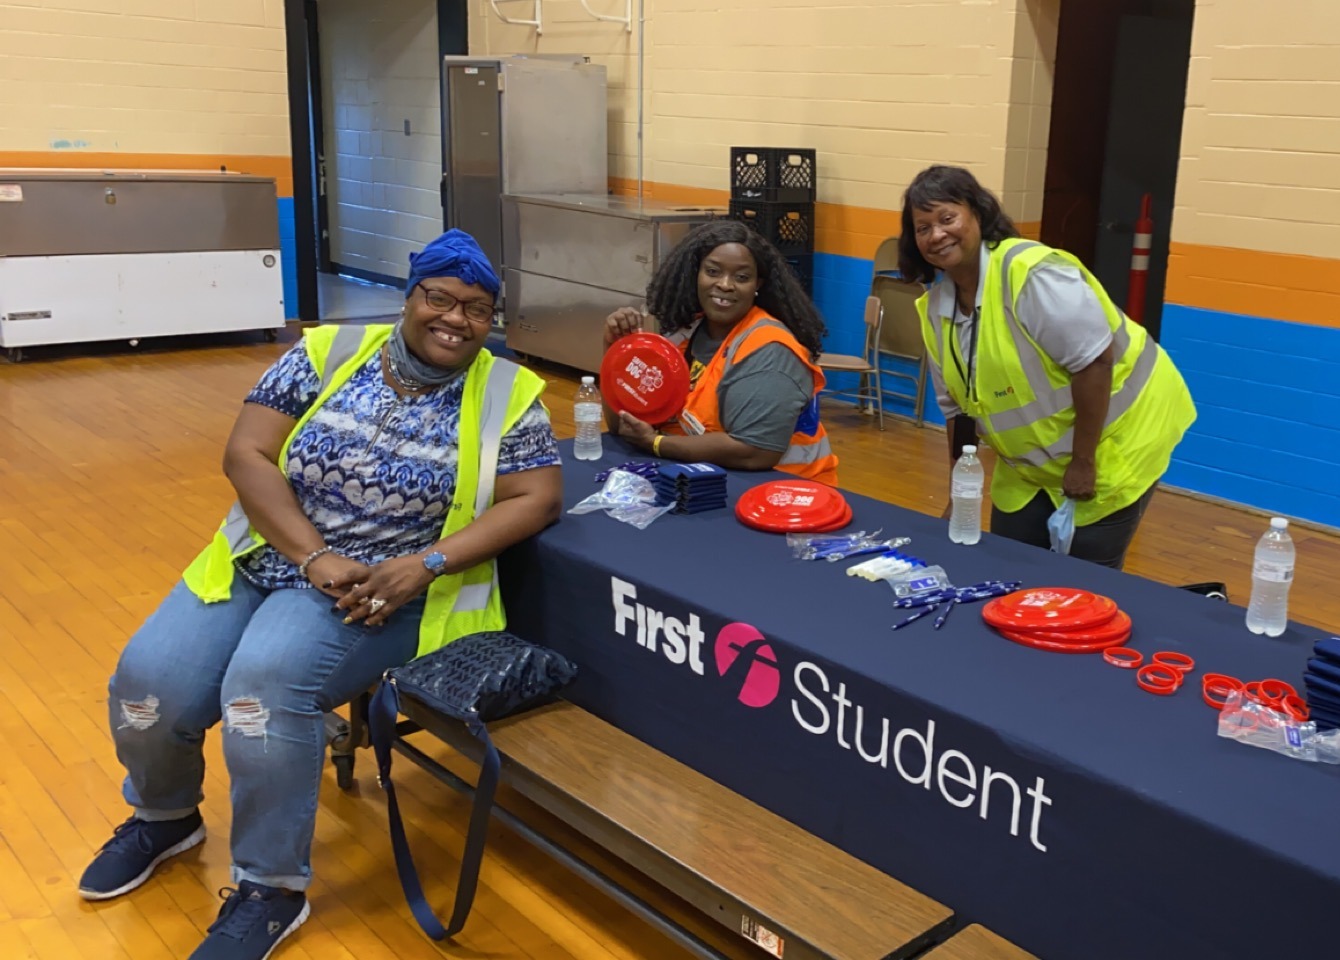 First Student bus drivers smiling at table